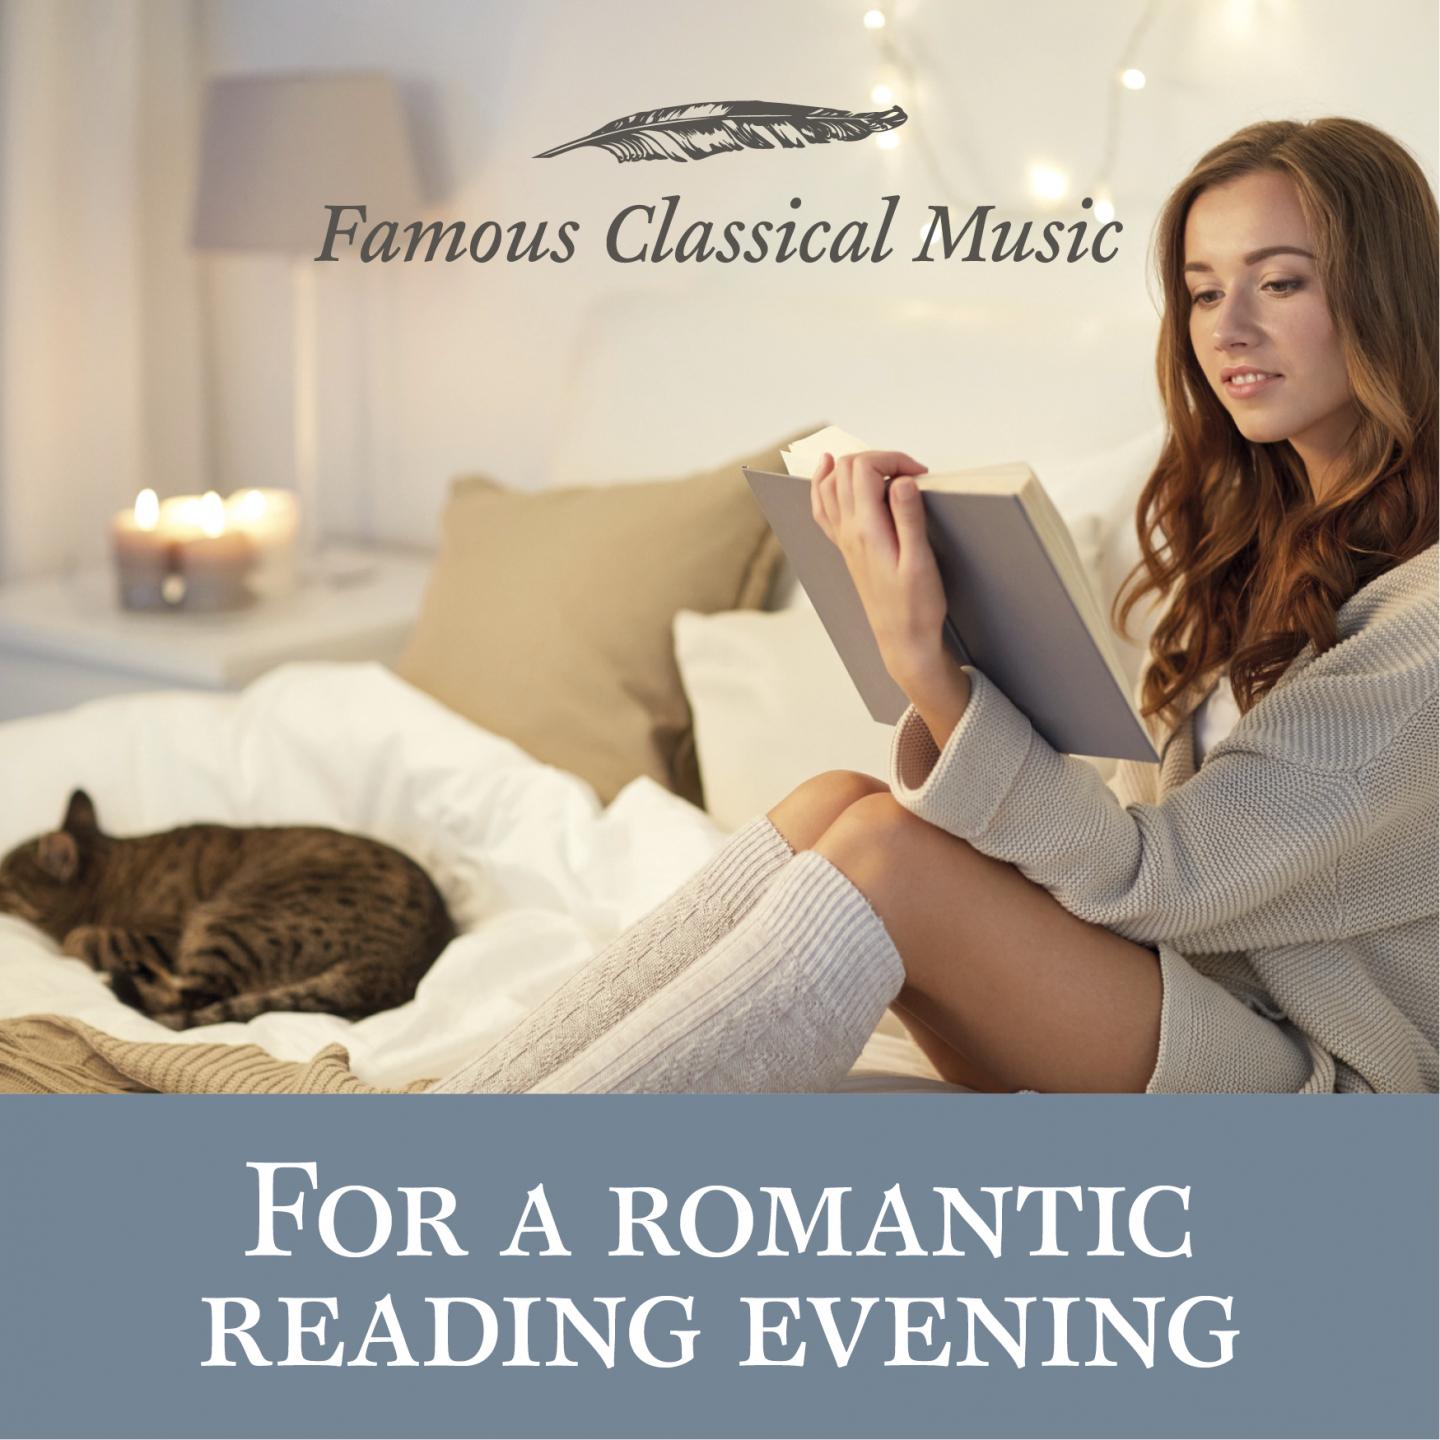 For a Romantic Reading Evening (Famous Classical Music)